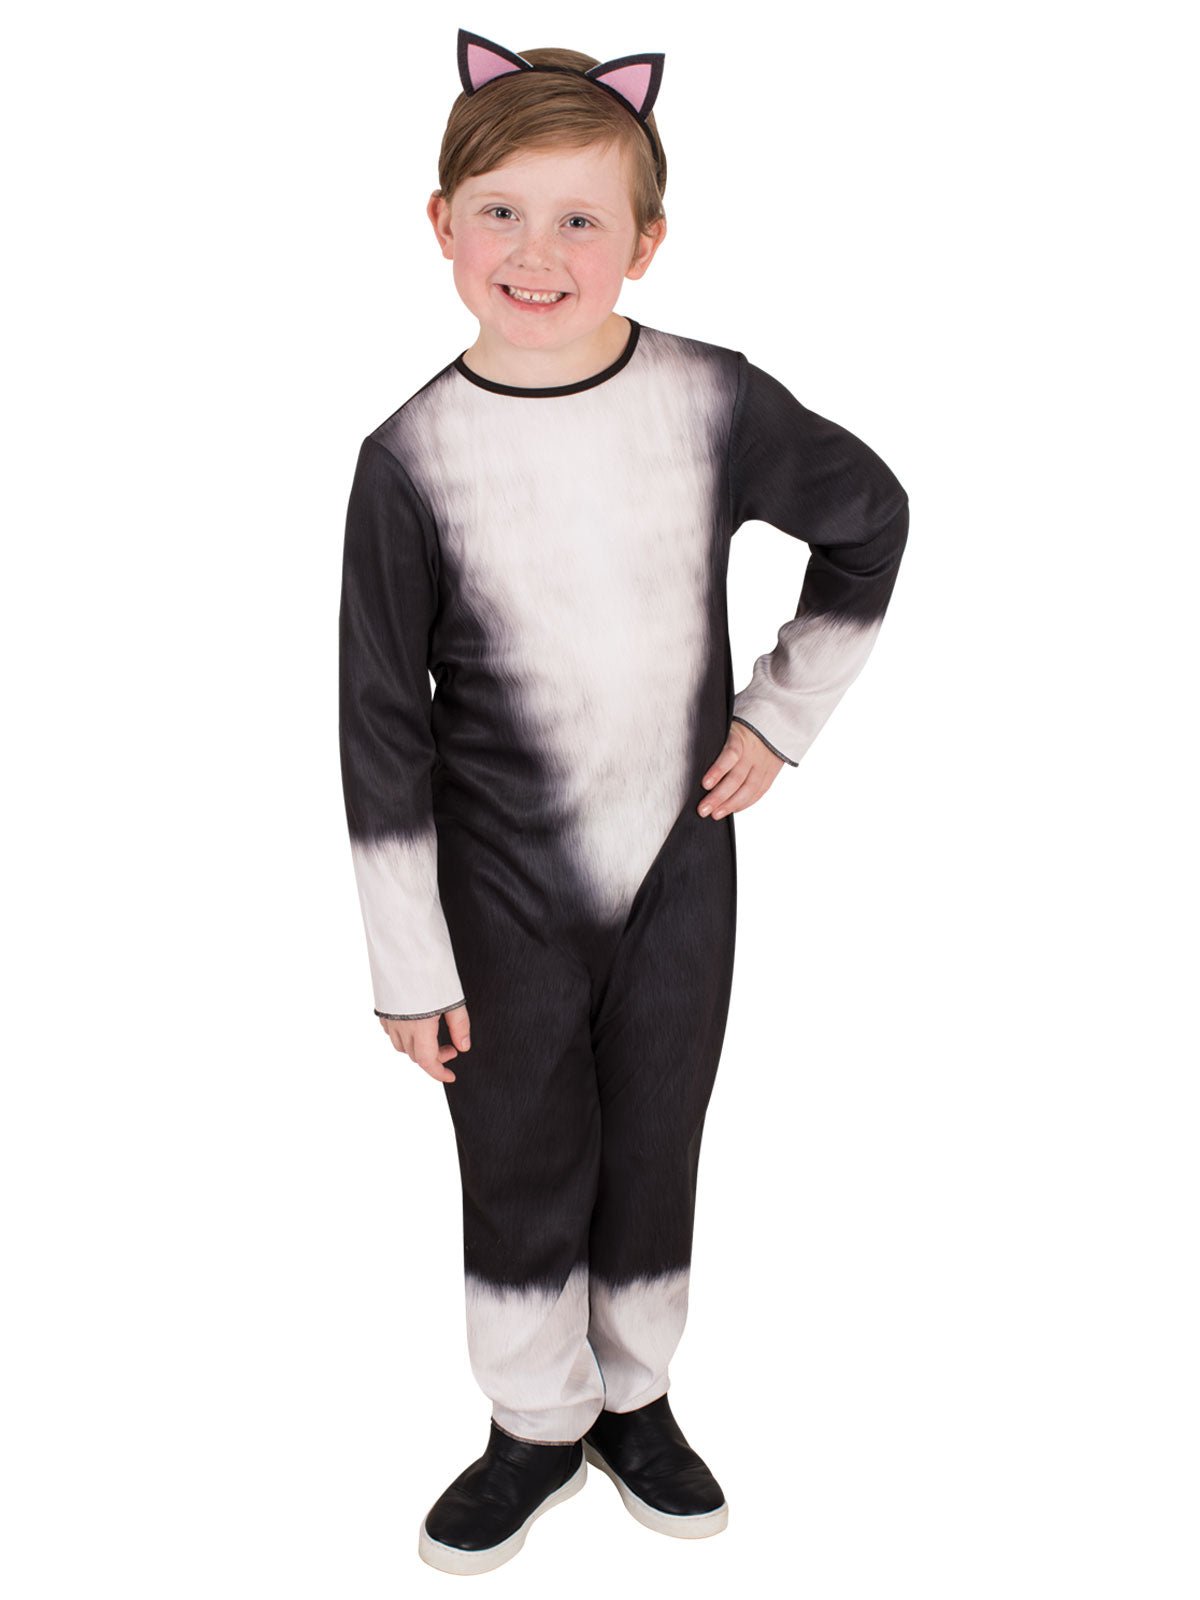 Adorable Cat Costume for kids, complete with digitally printed